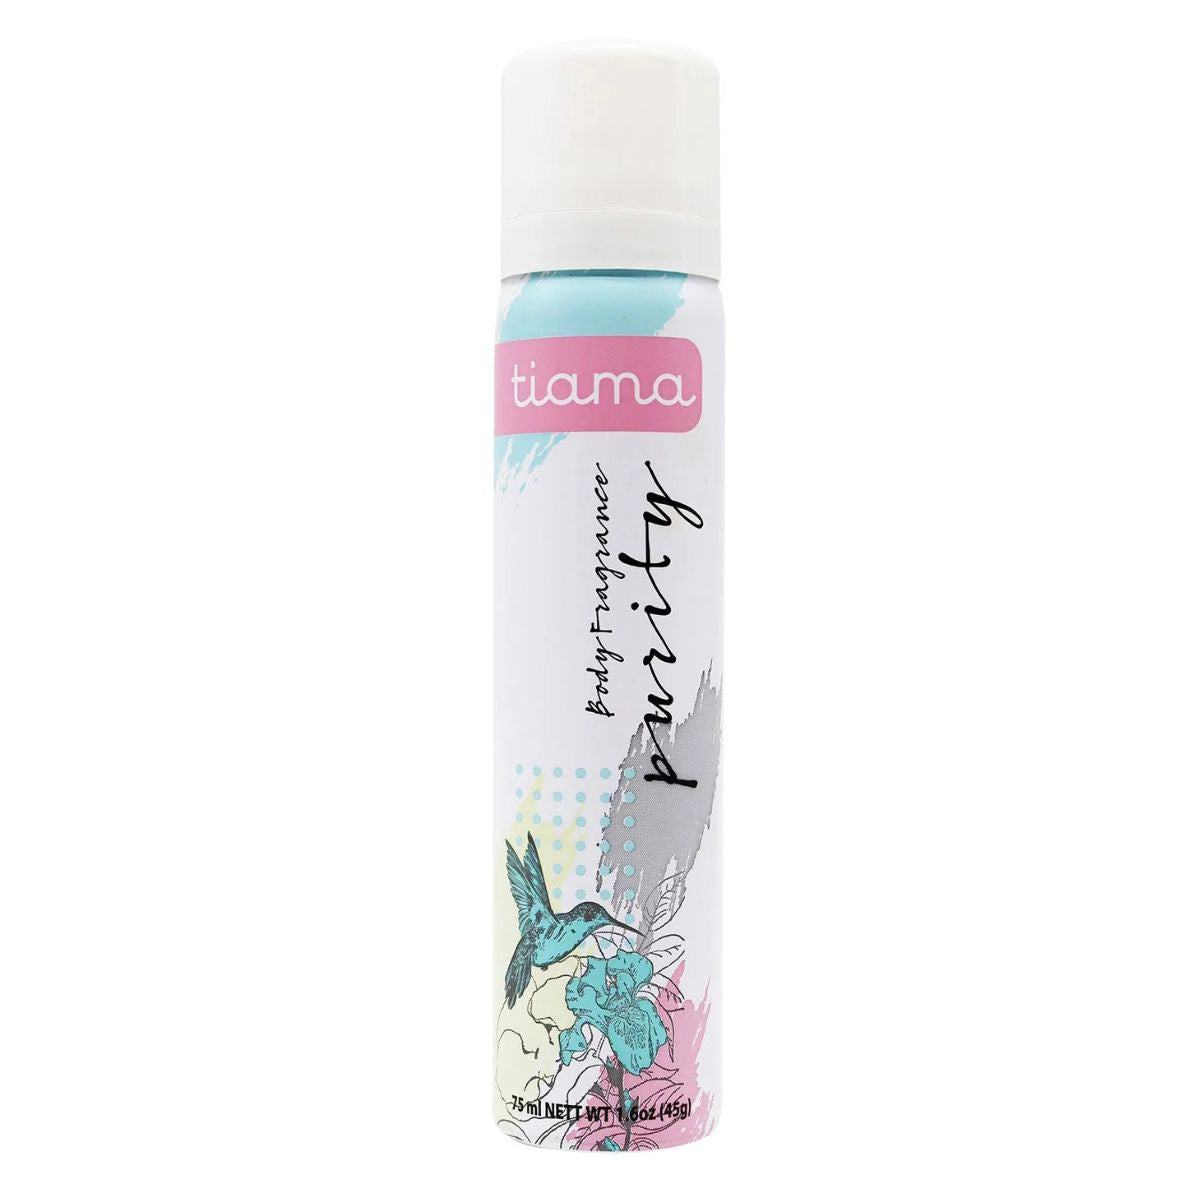 A can of Tiama - Body Fragrance Spray Purity - 75ml featuring floral and bird illustrations on a white background with a refreshing pure scent.